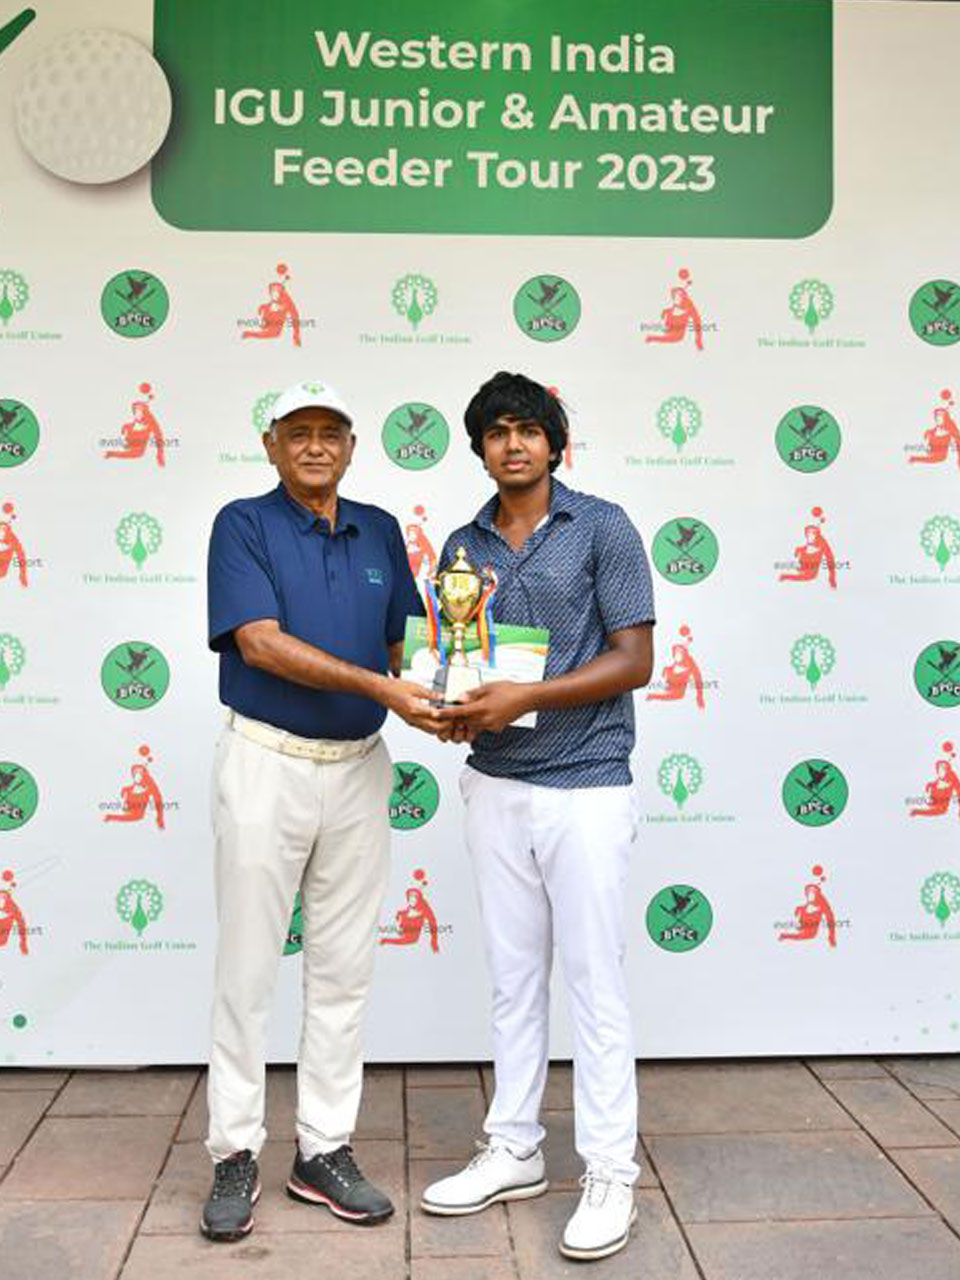 Shamit Dakhane finished 2nd at the West Zone Feeder Tour in the Amateur section at BPGC, Mumbai.